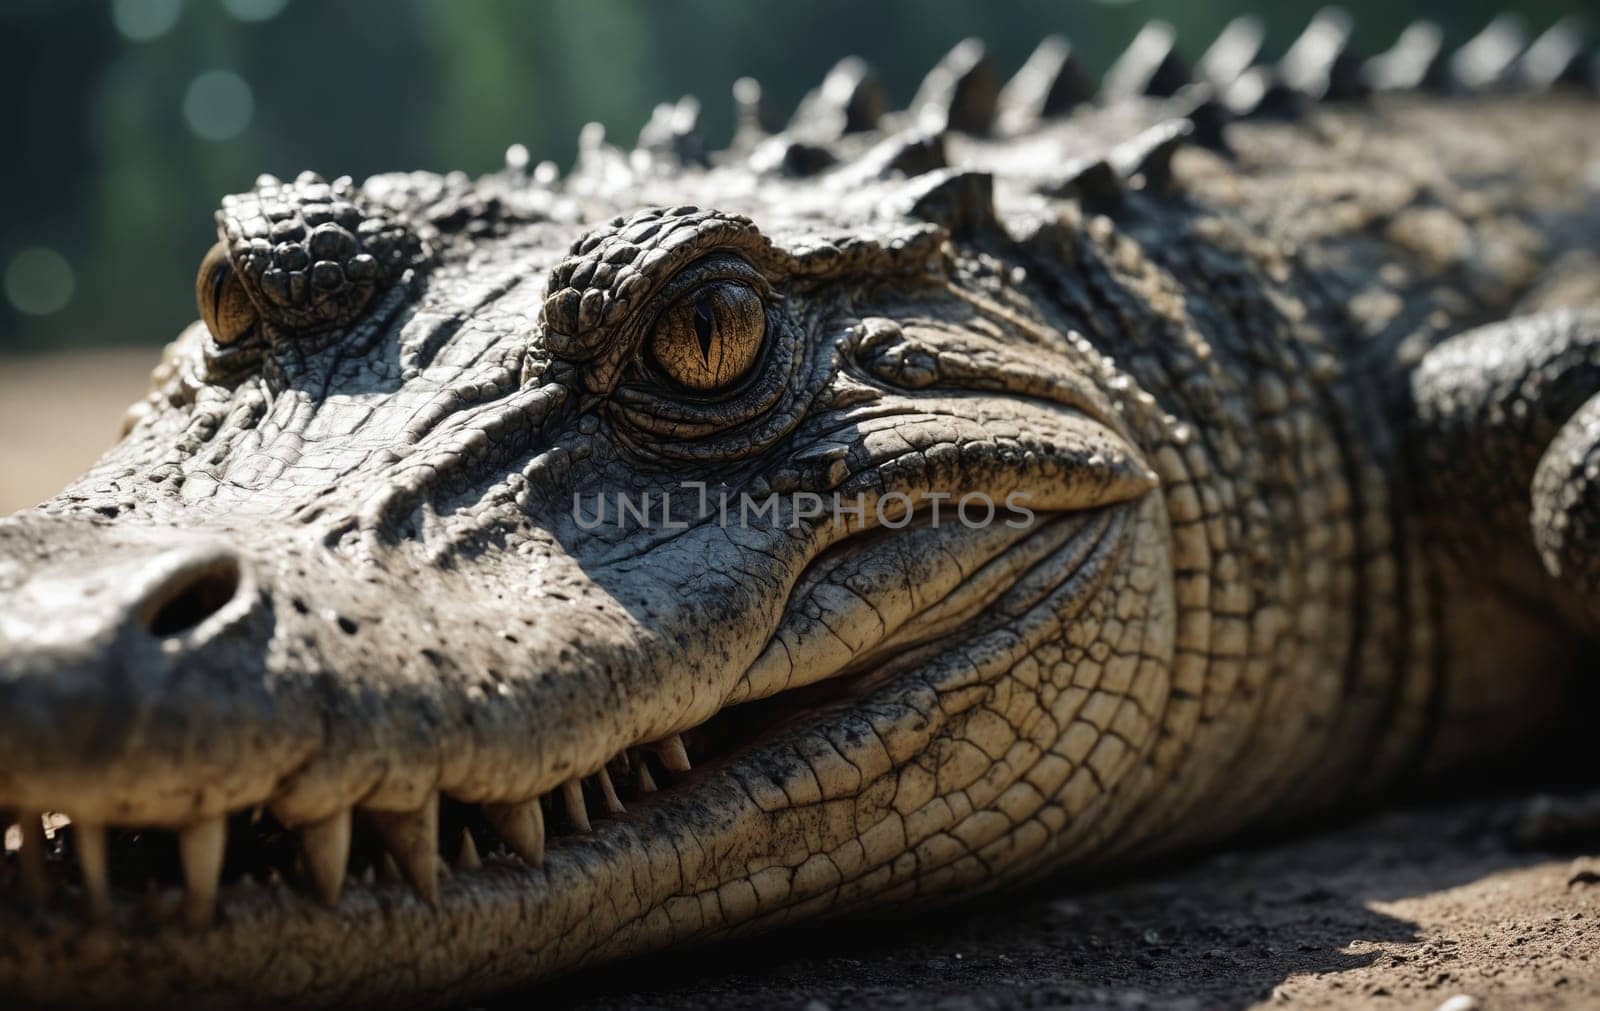 a close up of a crocodile laying on the ground with its mouth open by Andre1ns